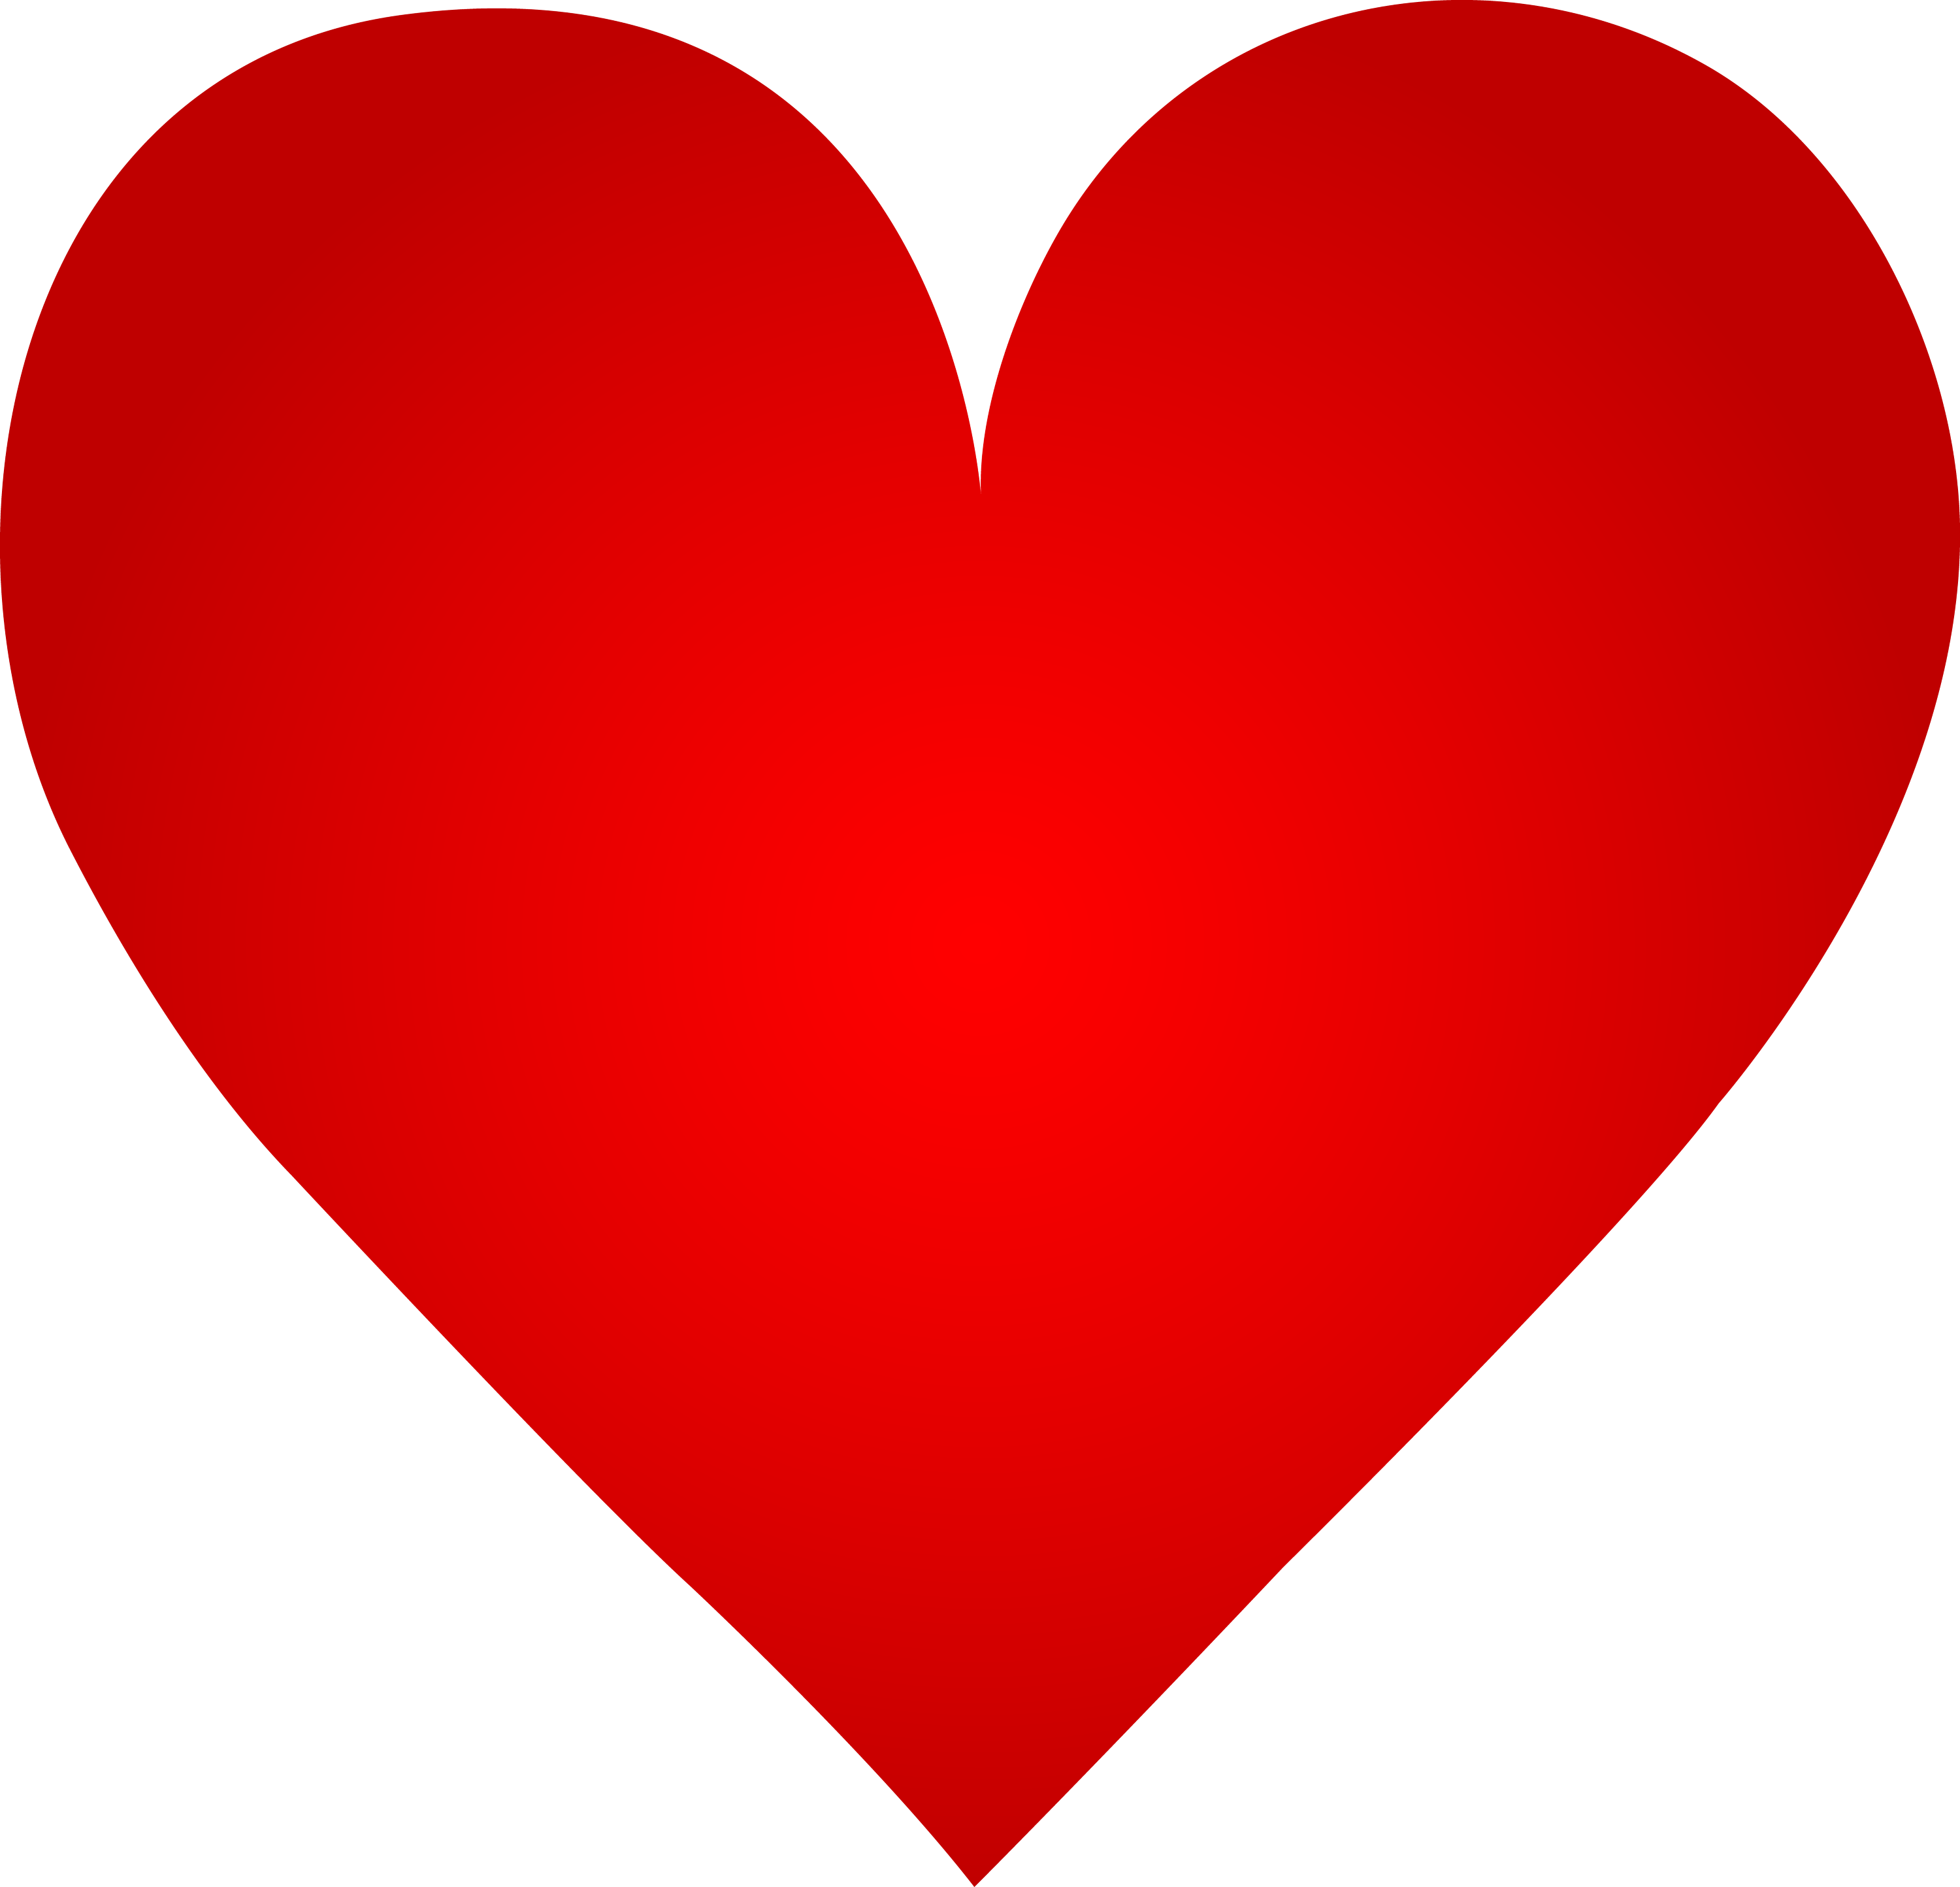 big red heart clipart - photo #3